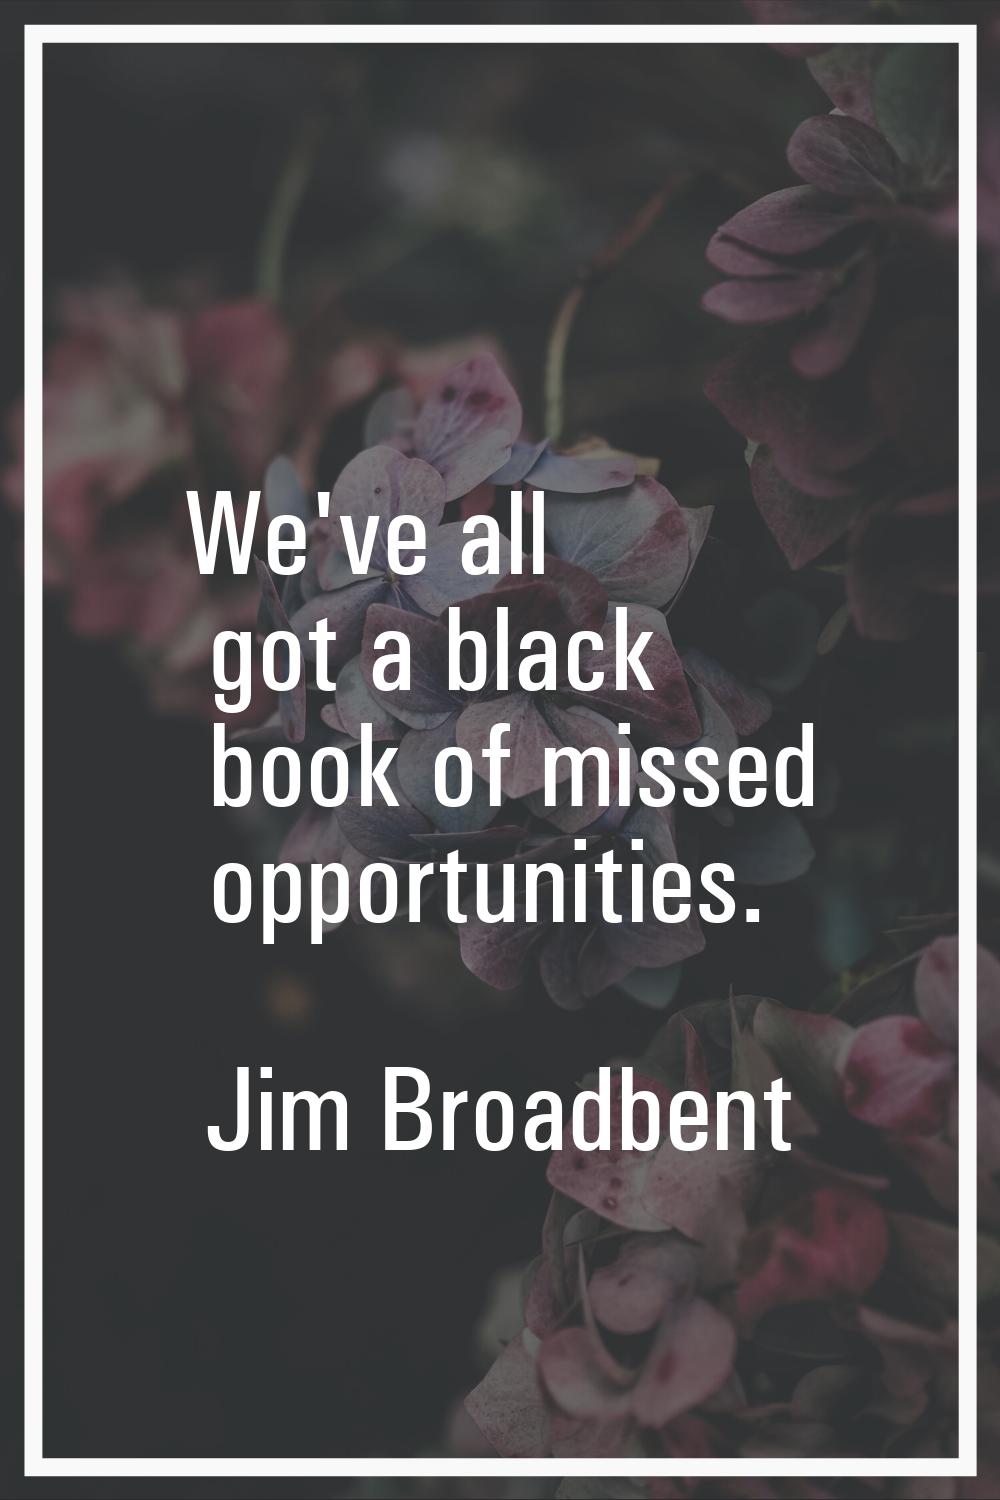 We've all got a black book of missed opportunities.